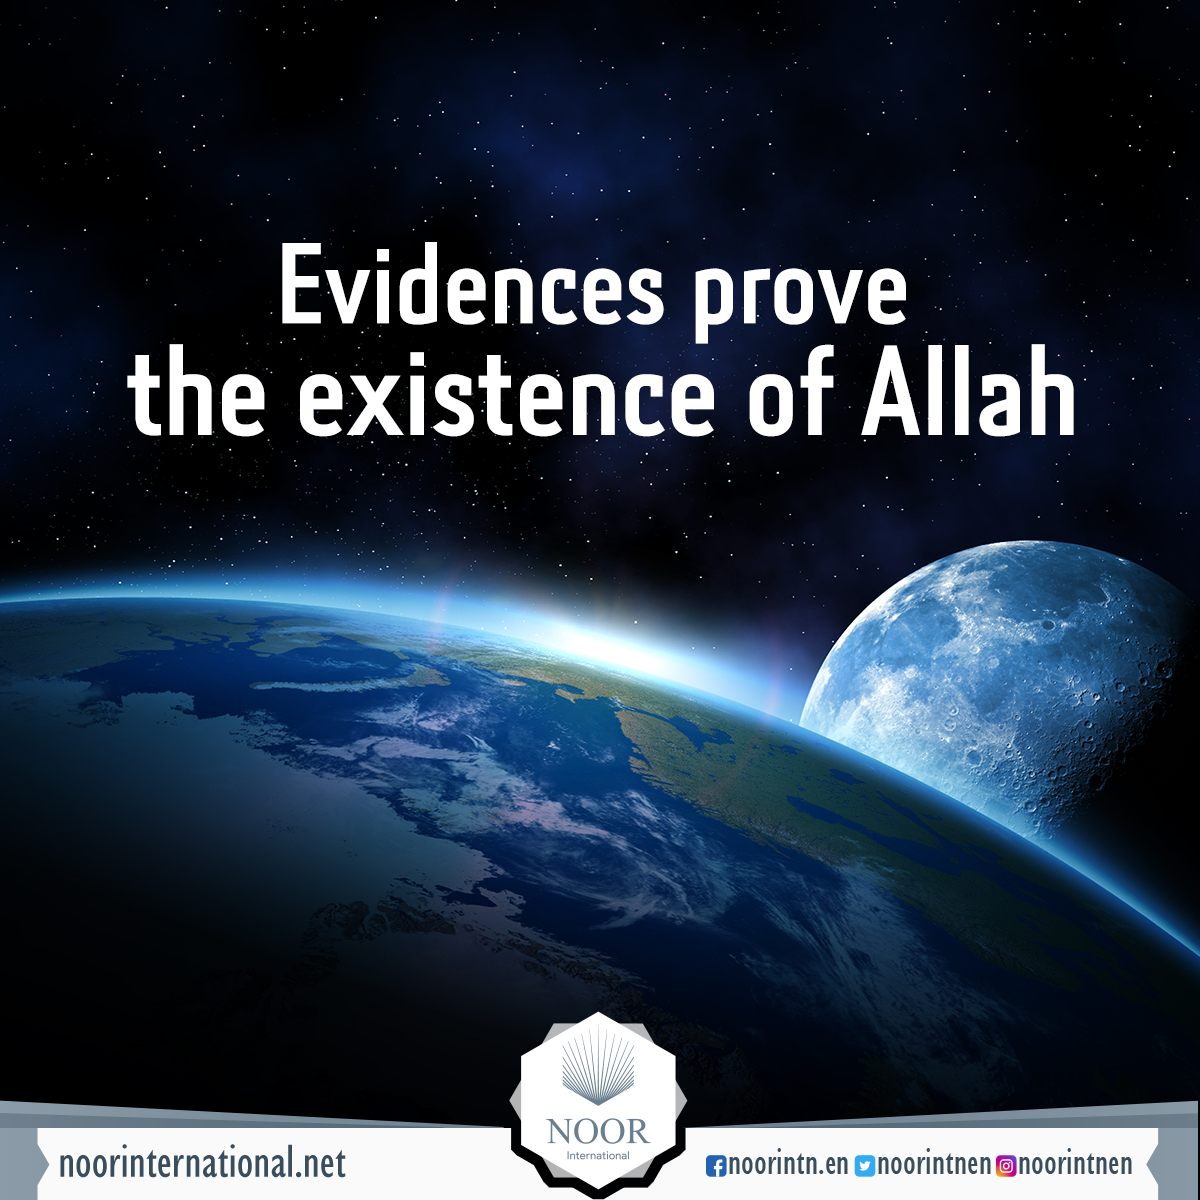 Evidences prove the existence of Allah